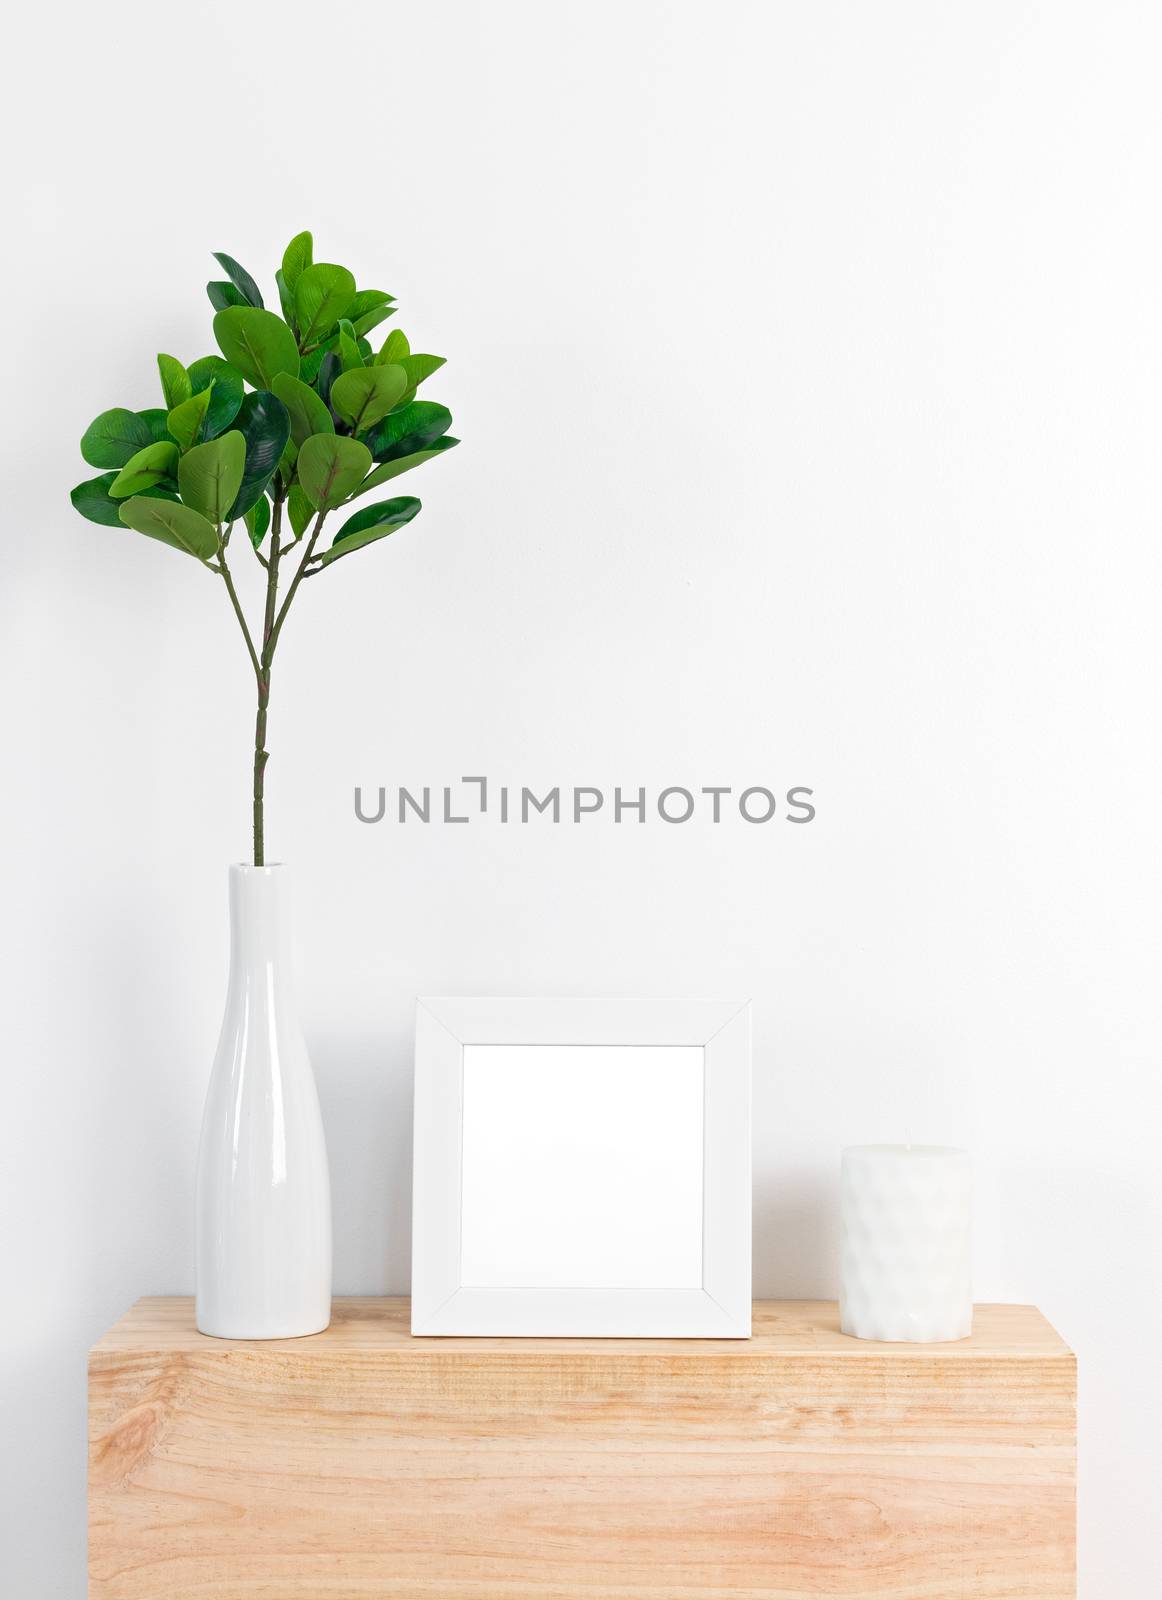 Stylish home decor with white picture frame, ficus leaves in a ceramic vase, and candle.